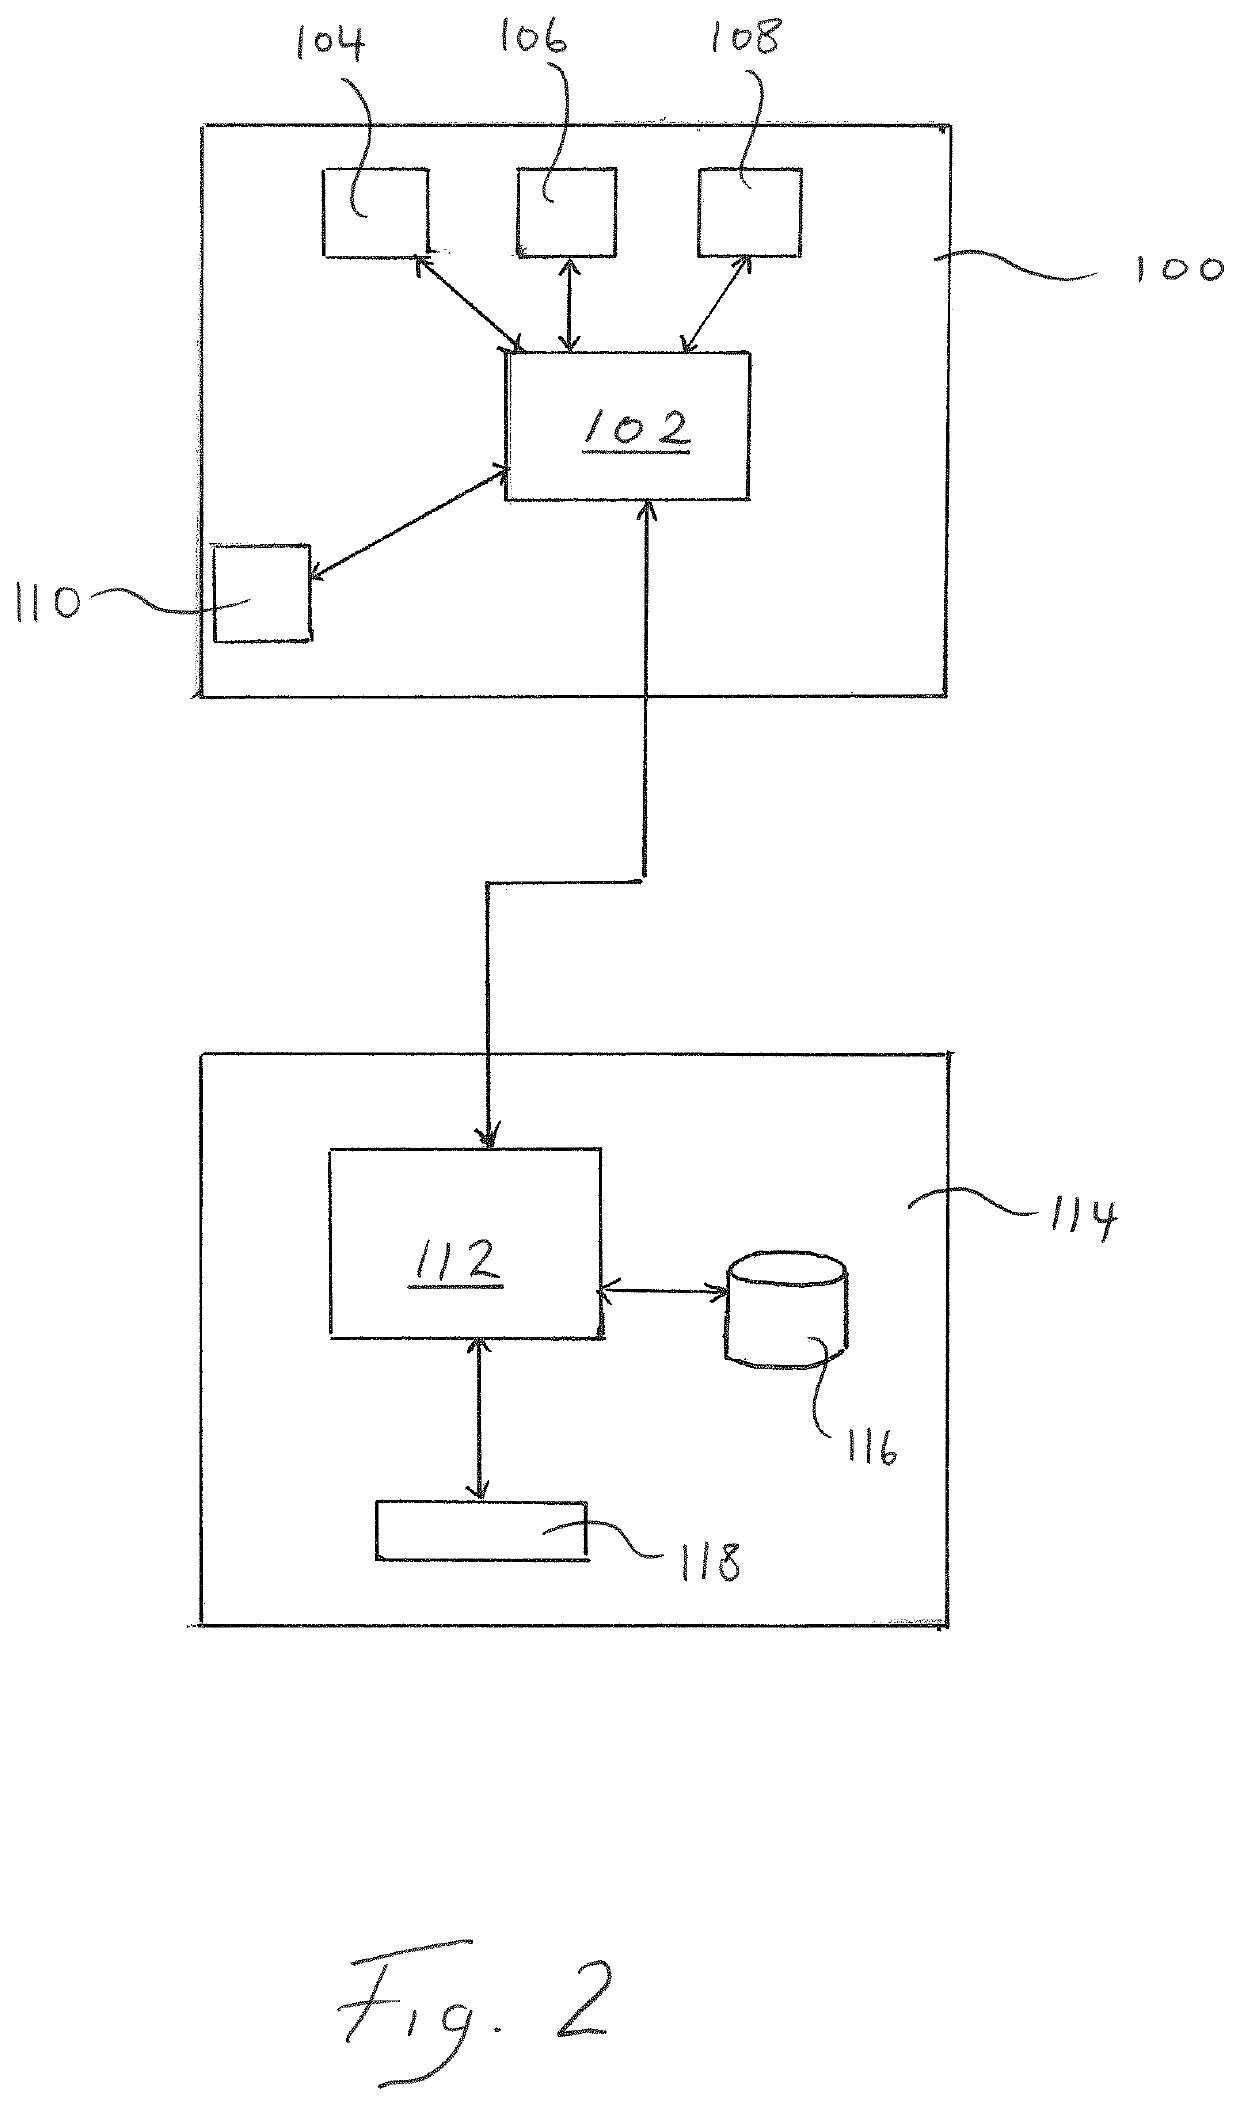 Improved breath sampling device and method